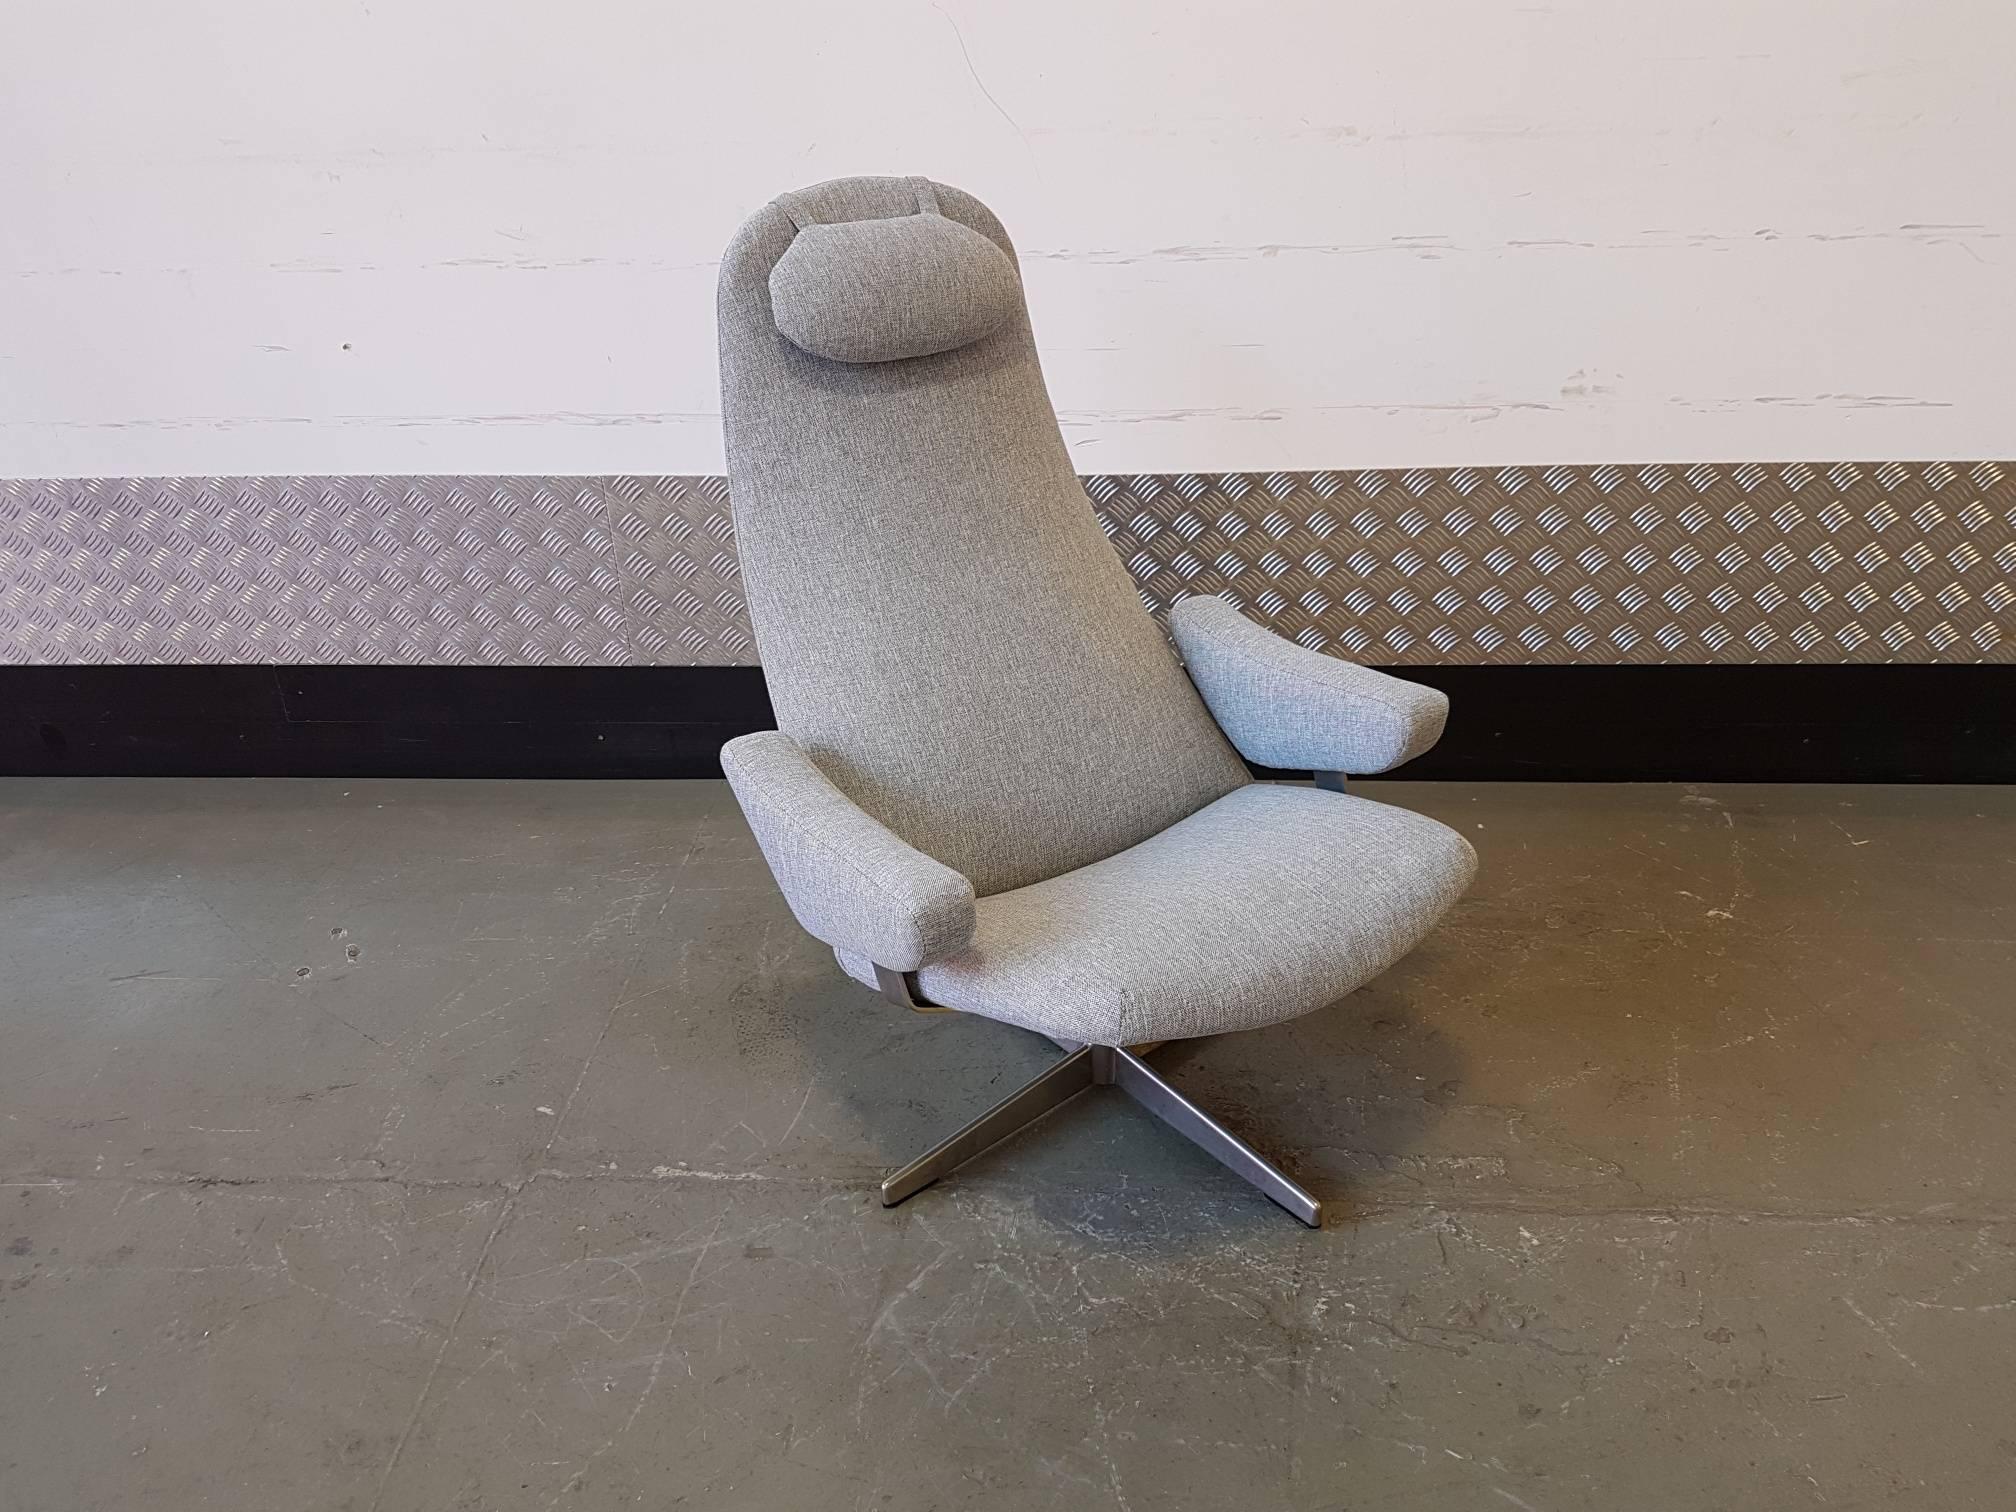 This 'Contourette Roto' swivel chair was designed by Alf Svensson, and produced by DUX in Denmark, during the 1960s. It features a light grey new upholstery seat with a single headrest. The frame is made from metal and features a swivel base with